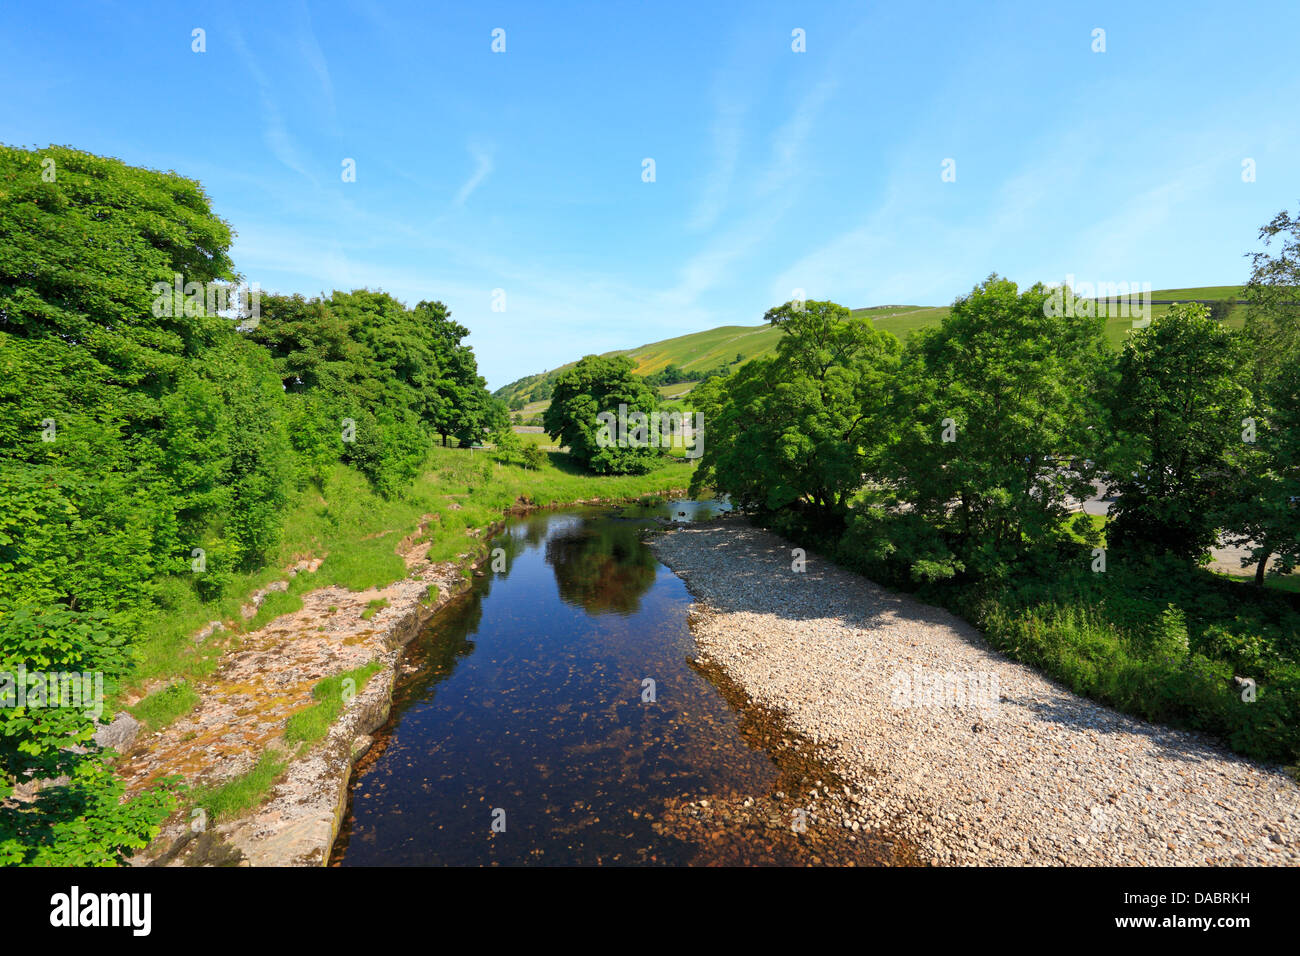 The River Wharfe in Kettlewell, Wharfedale, North Yorkshire, Yorkshire Dales National Park, England, UK. Stock Photo